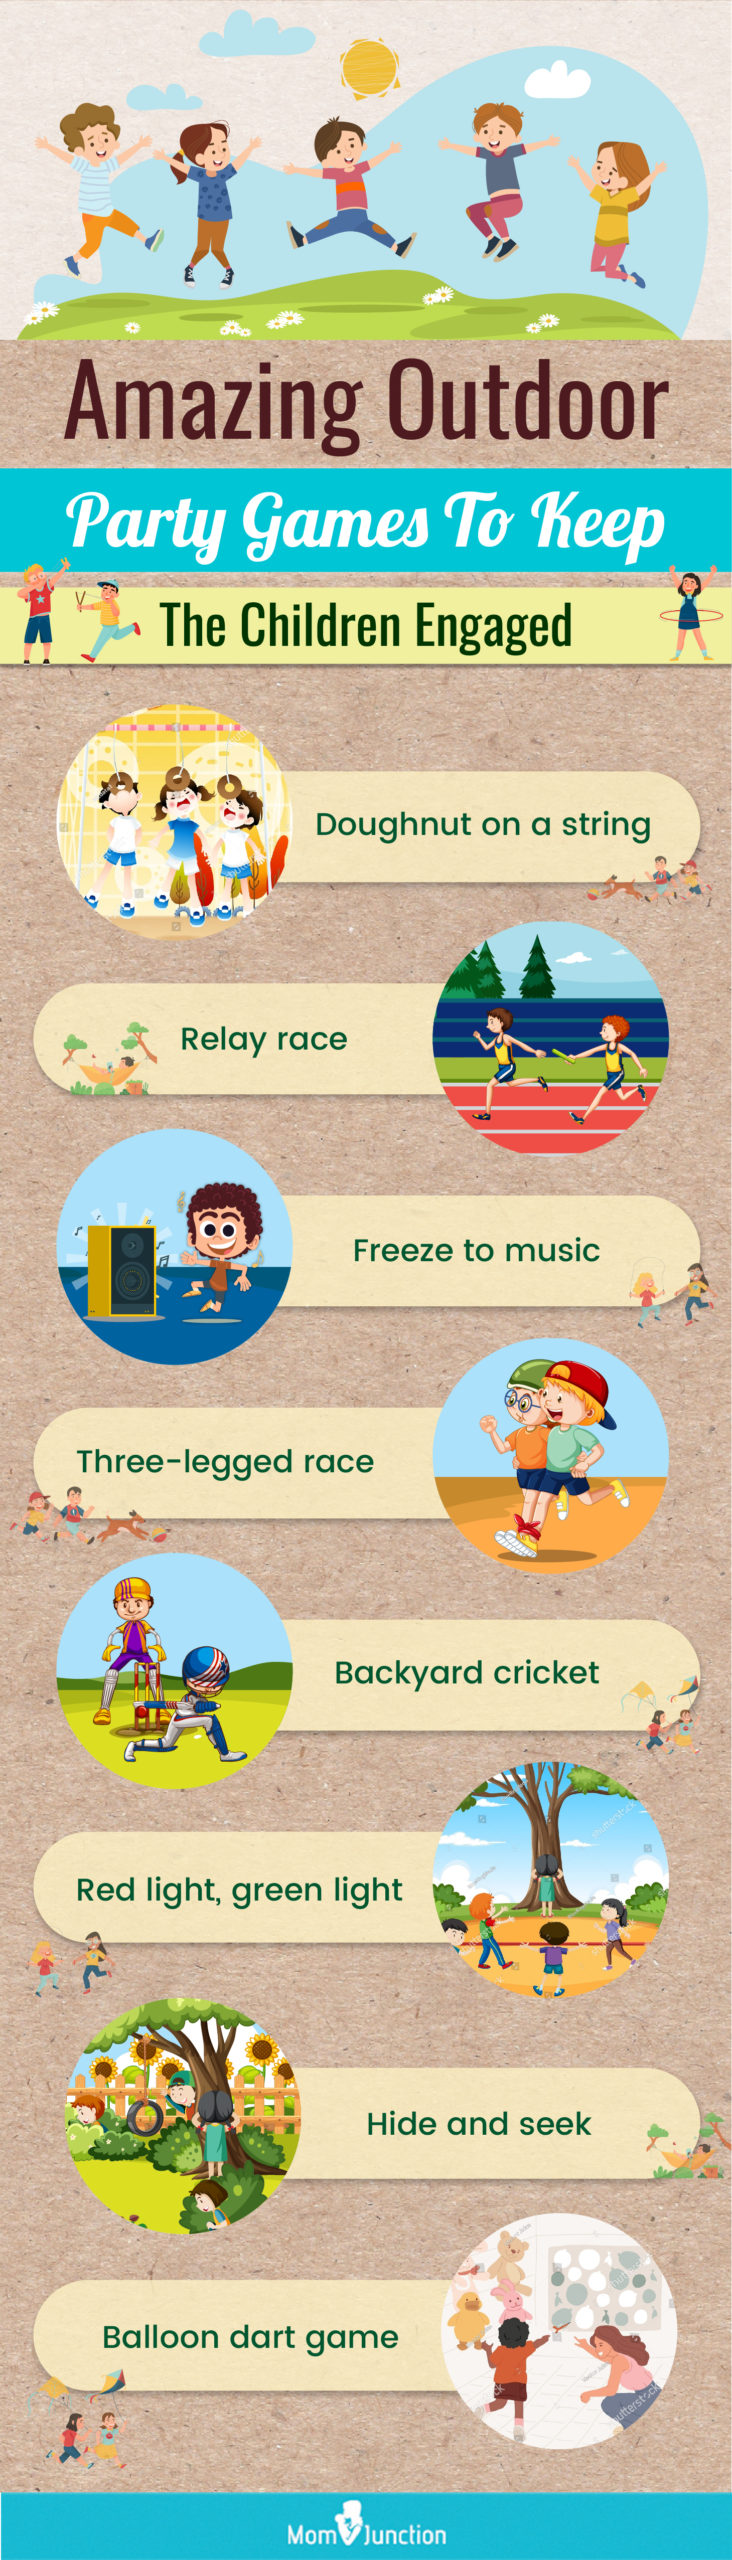 amazing outdoor party games to keep the children engaged (infographic)